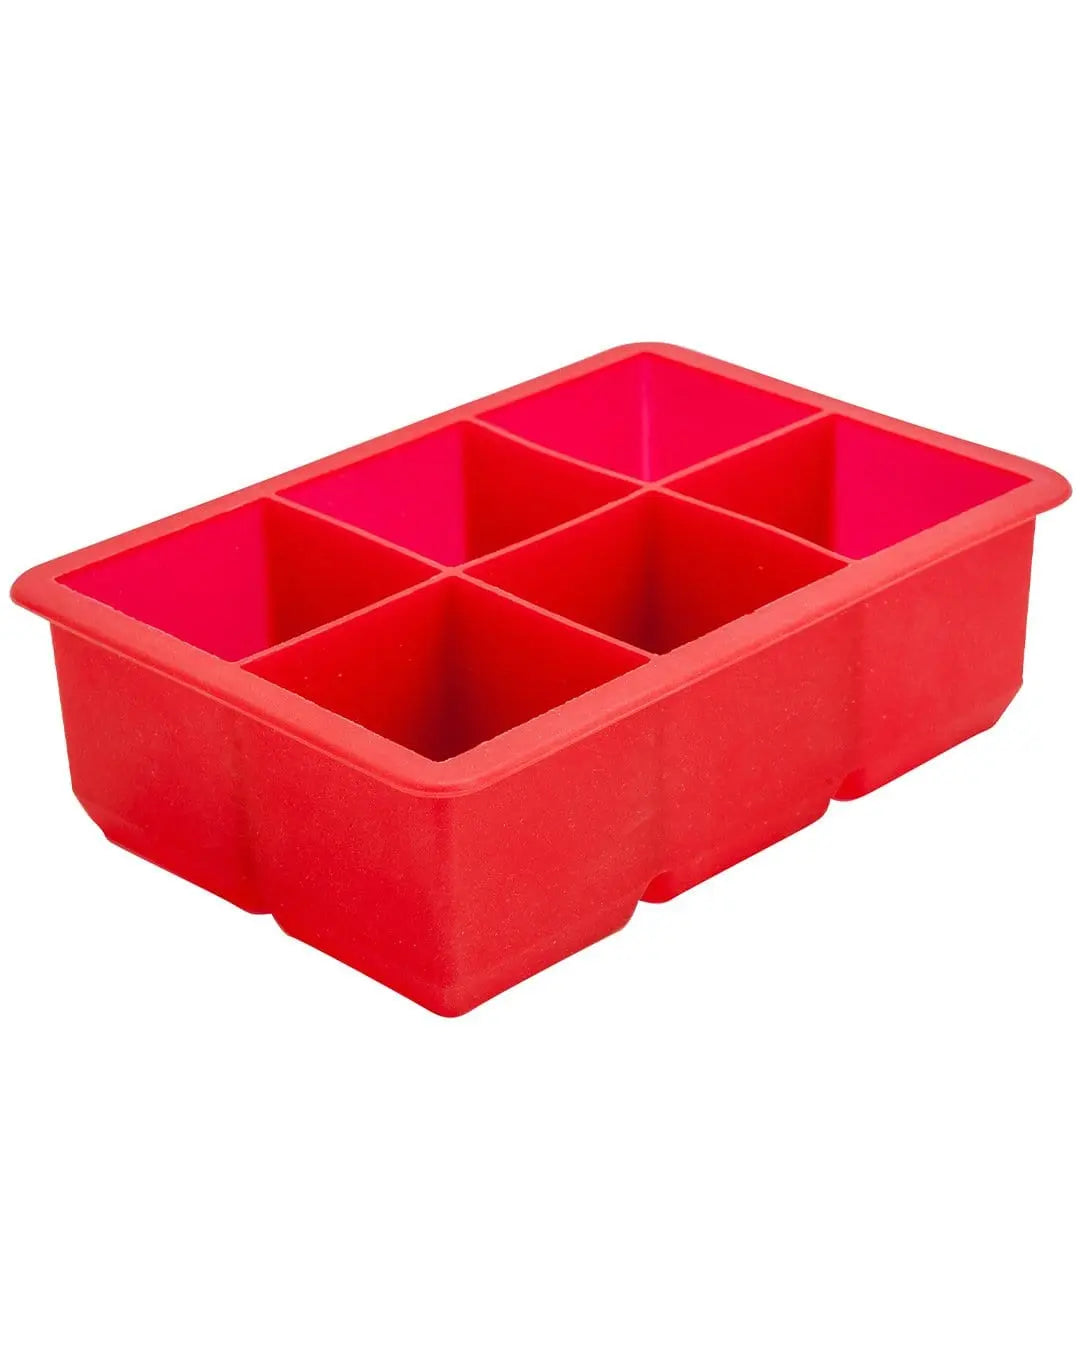 Beaumont 6 Cavity Red Silicone Ice Cube Mould Barware 5020229107484